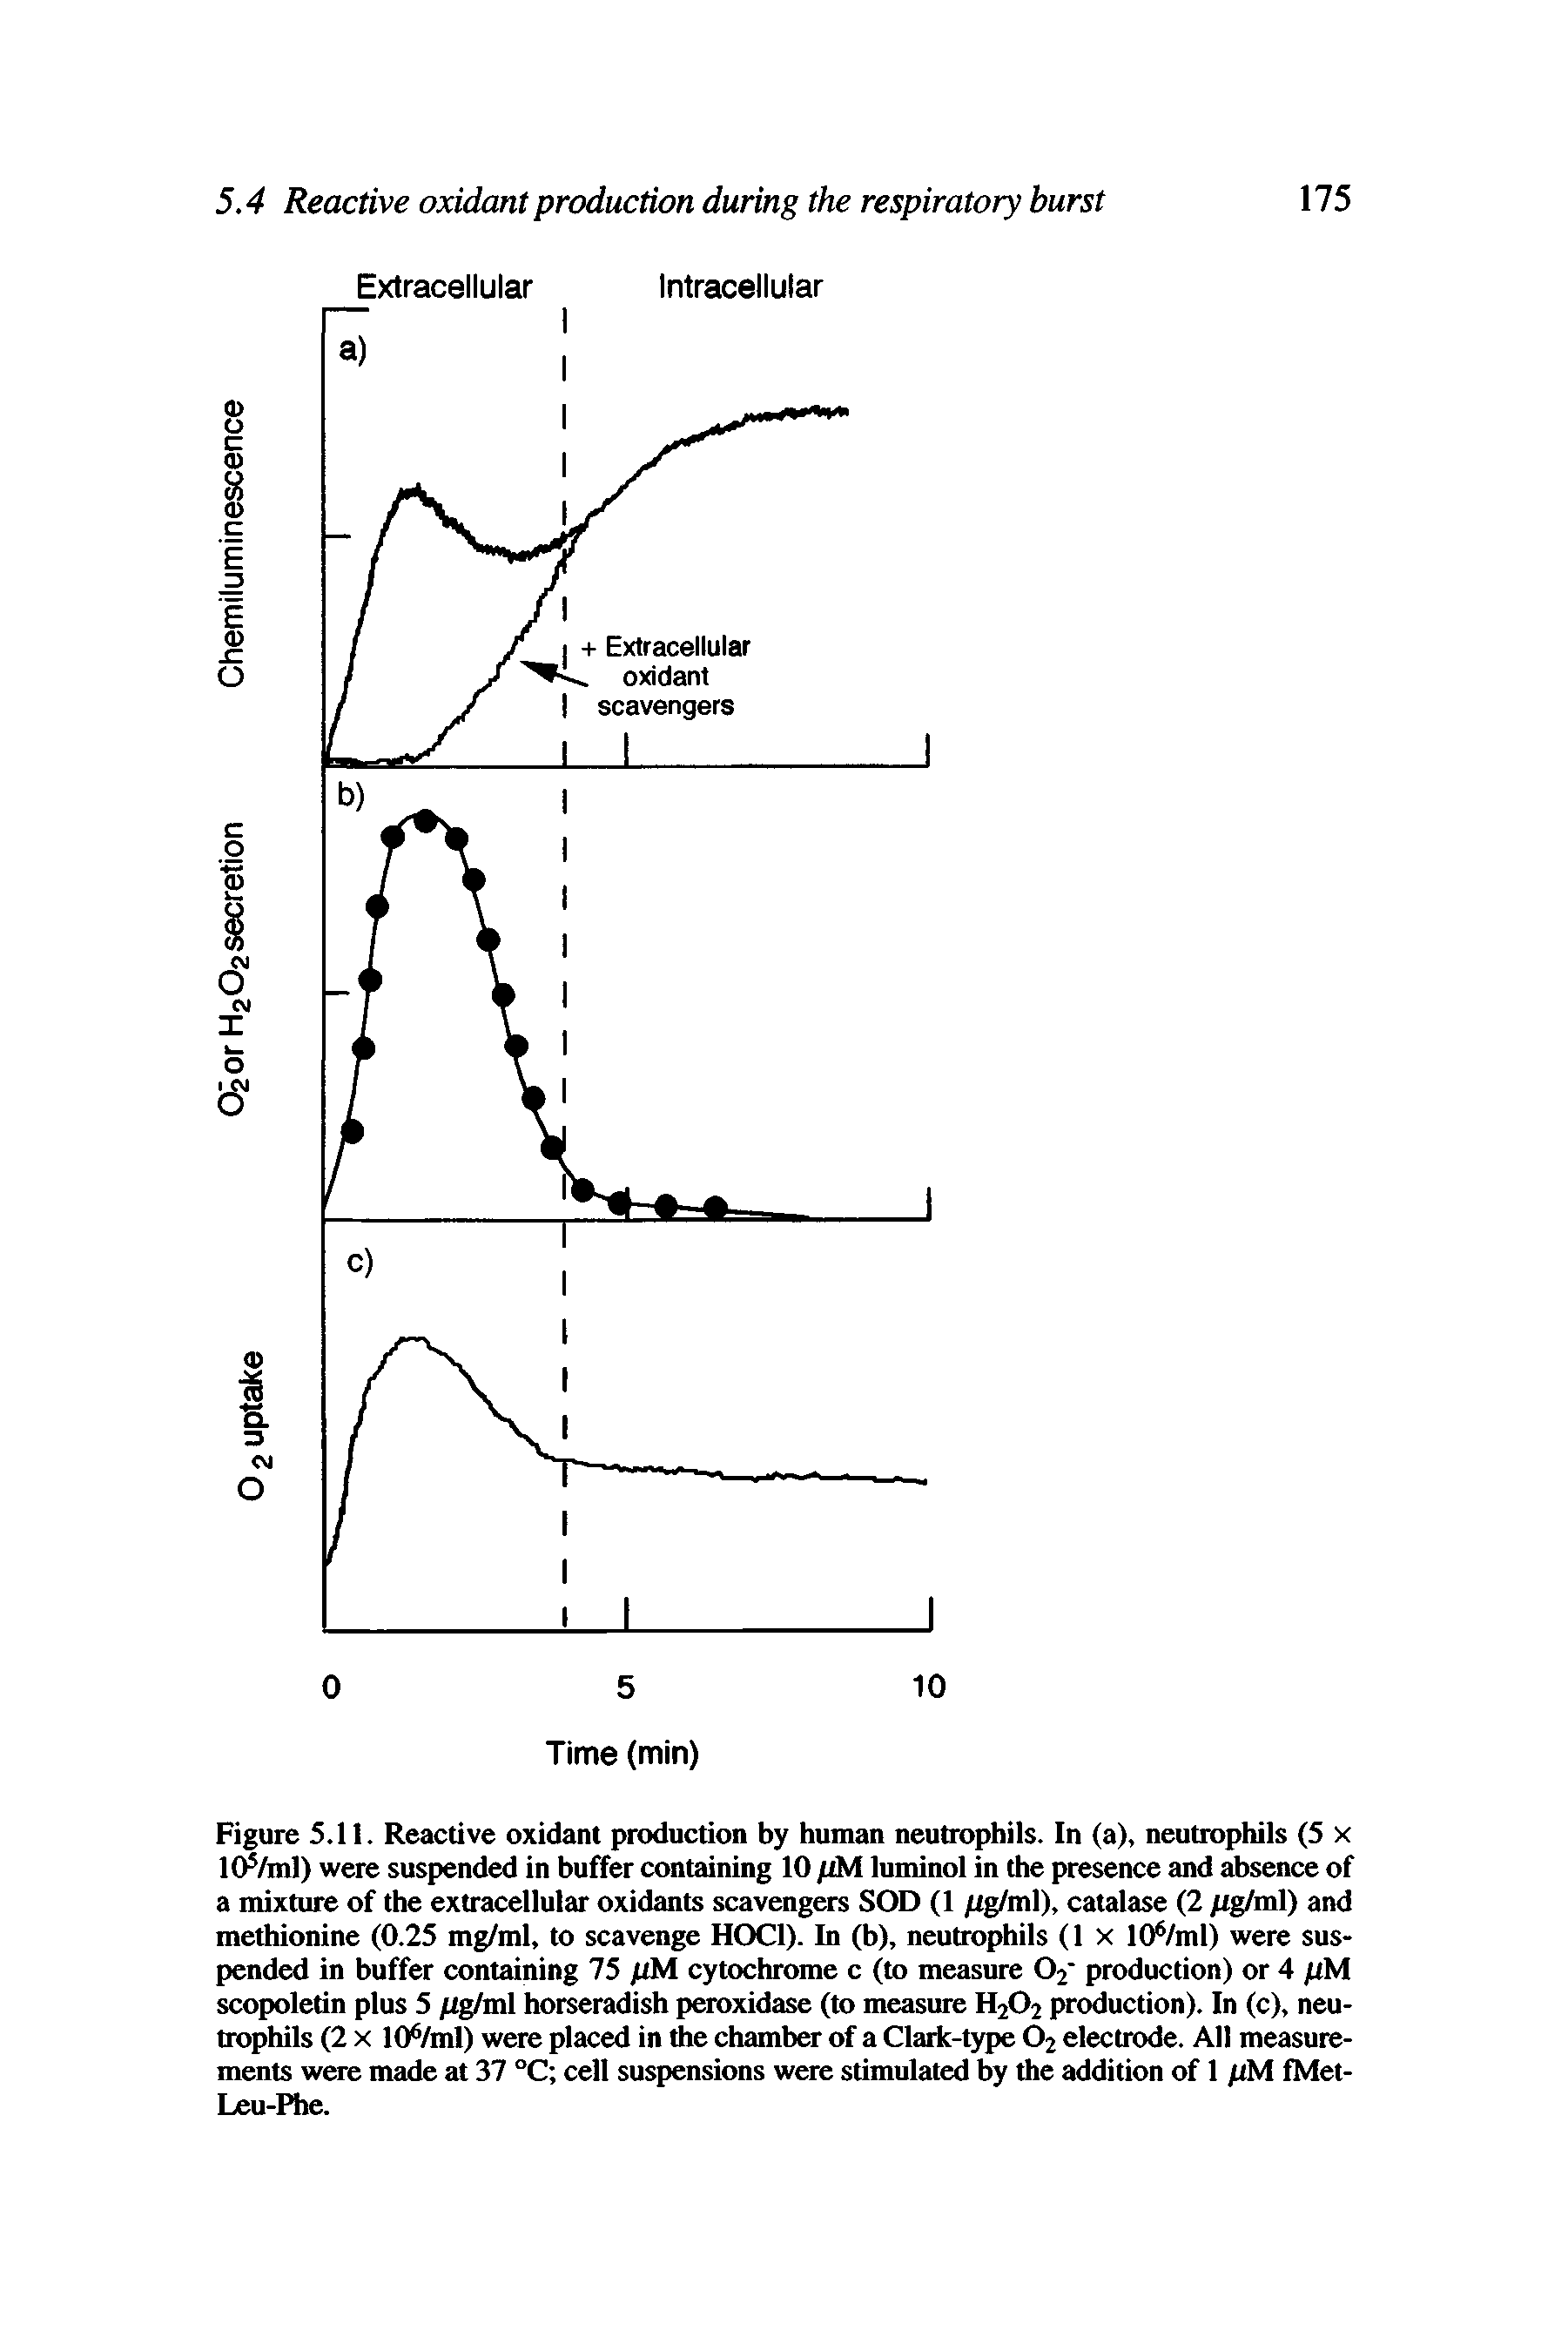 Figure 5.11. Reactive oxidant production by human neutrophils. In (a), neutrophils (5 x lOVml) were suspended in buffer containing 10 pM luminol in the presence and absence of a mixture of the extracellular oxidants scavengers SOD (1 /ig/ml), catalase (2 pg/ml) and methionine (0.25 mg/ml, to scavenge HOC1). In (b), neutrophils (1 x 106/ml) were suspended in buffer containing 75 jUM cytochrome c (to measure Of production) or 4 jUM scopoletin plus 5 /ig/ml horseradish peroxidase (to measure H202 production). In (c), neutrophils (2 x lOfyml) were placed in the chamber of a Clark-type 02 electrode. All measurements were made at 37 °C cell suspensions were stimulated by the addition of 1 /<M fMet-Leu-Phe.